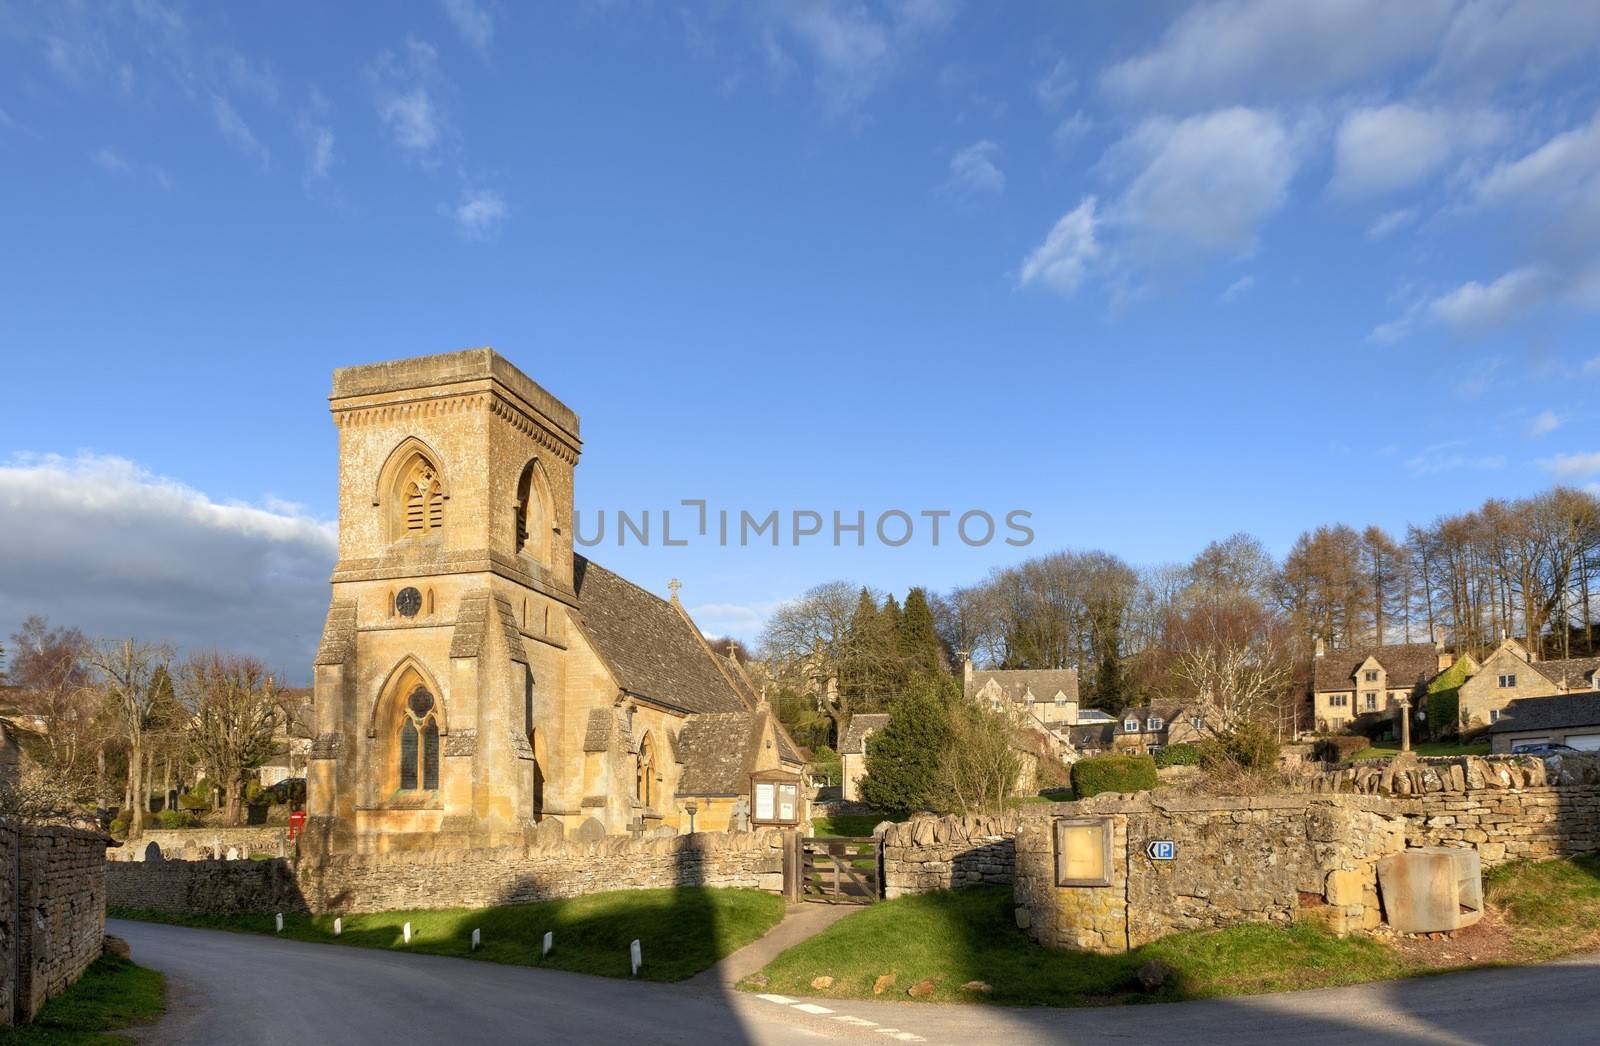 The pretty Cotswold church at Snowshill, Gloucestershire, England.